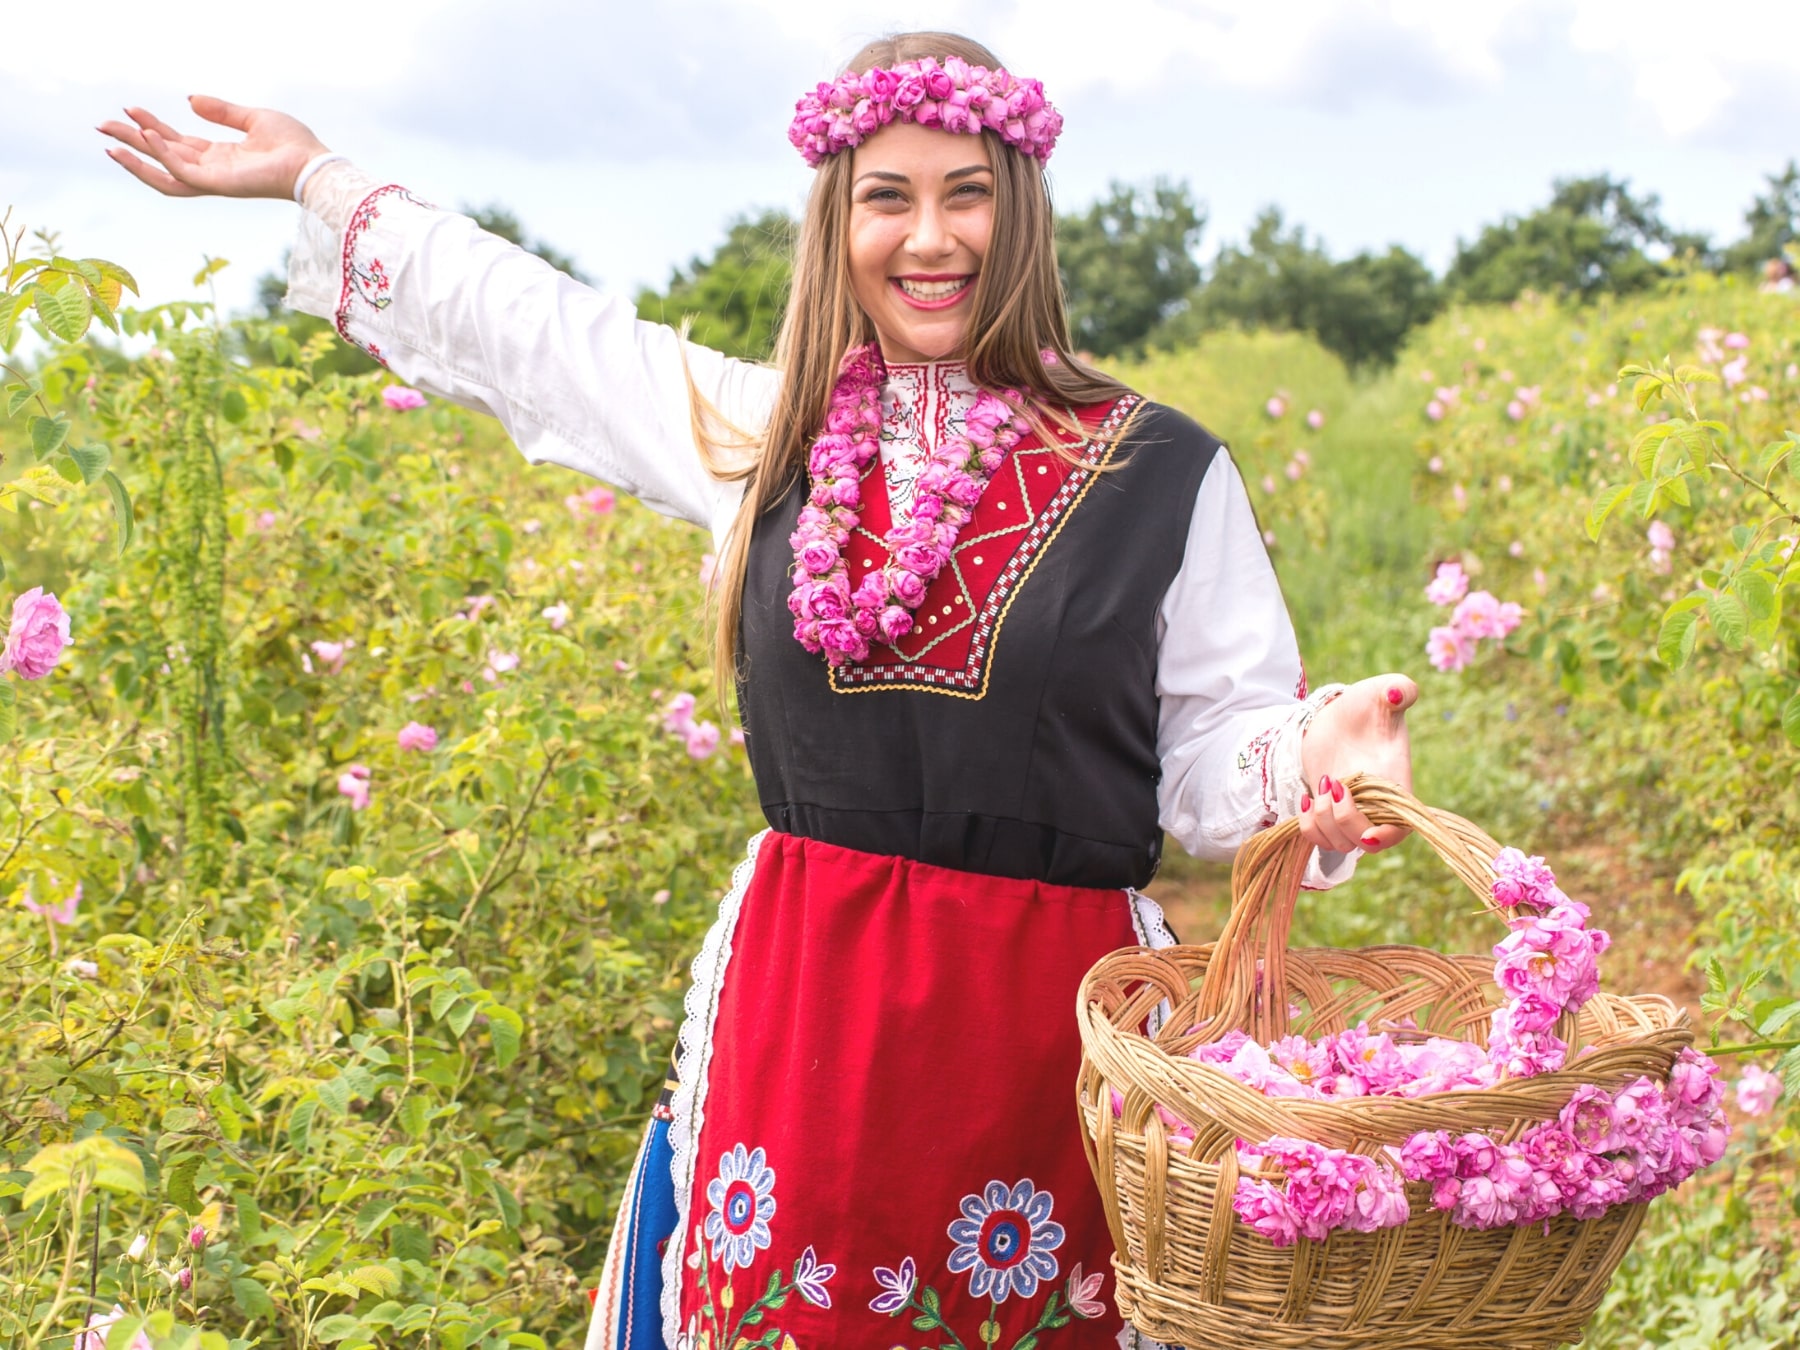 Rose valley, Plovdiv, Sofia and rose festival in Bulgaria 2020